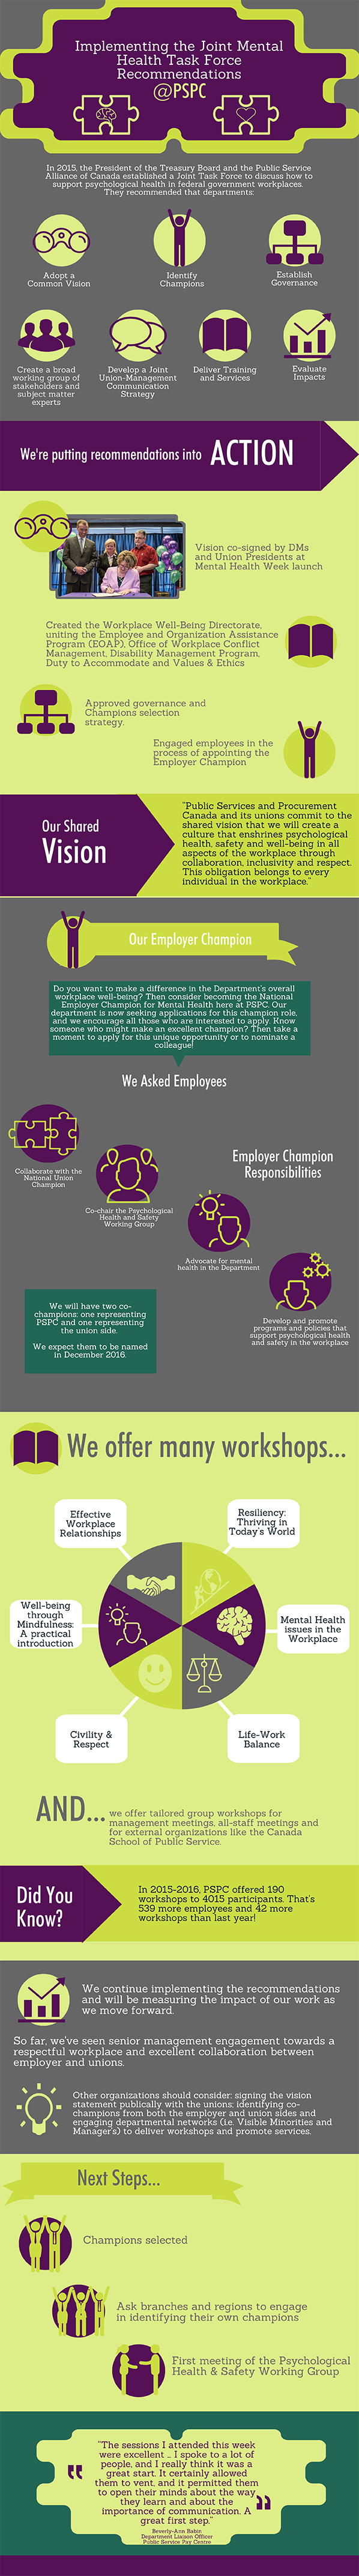 Infographic: PSPC On-boarding and Orientation Program